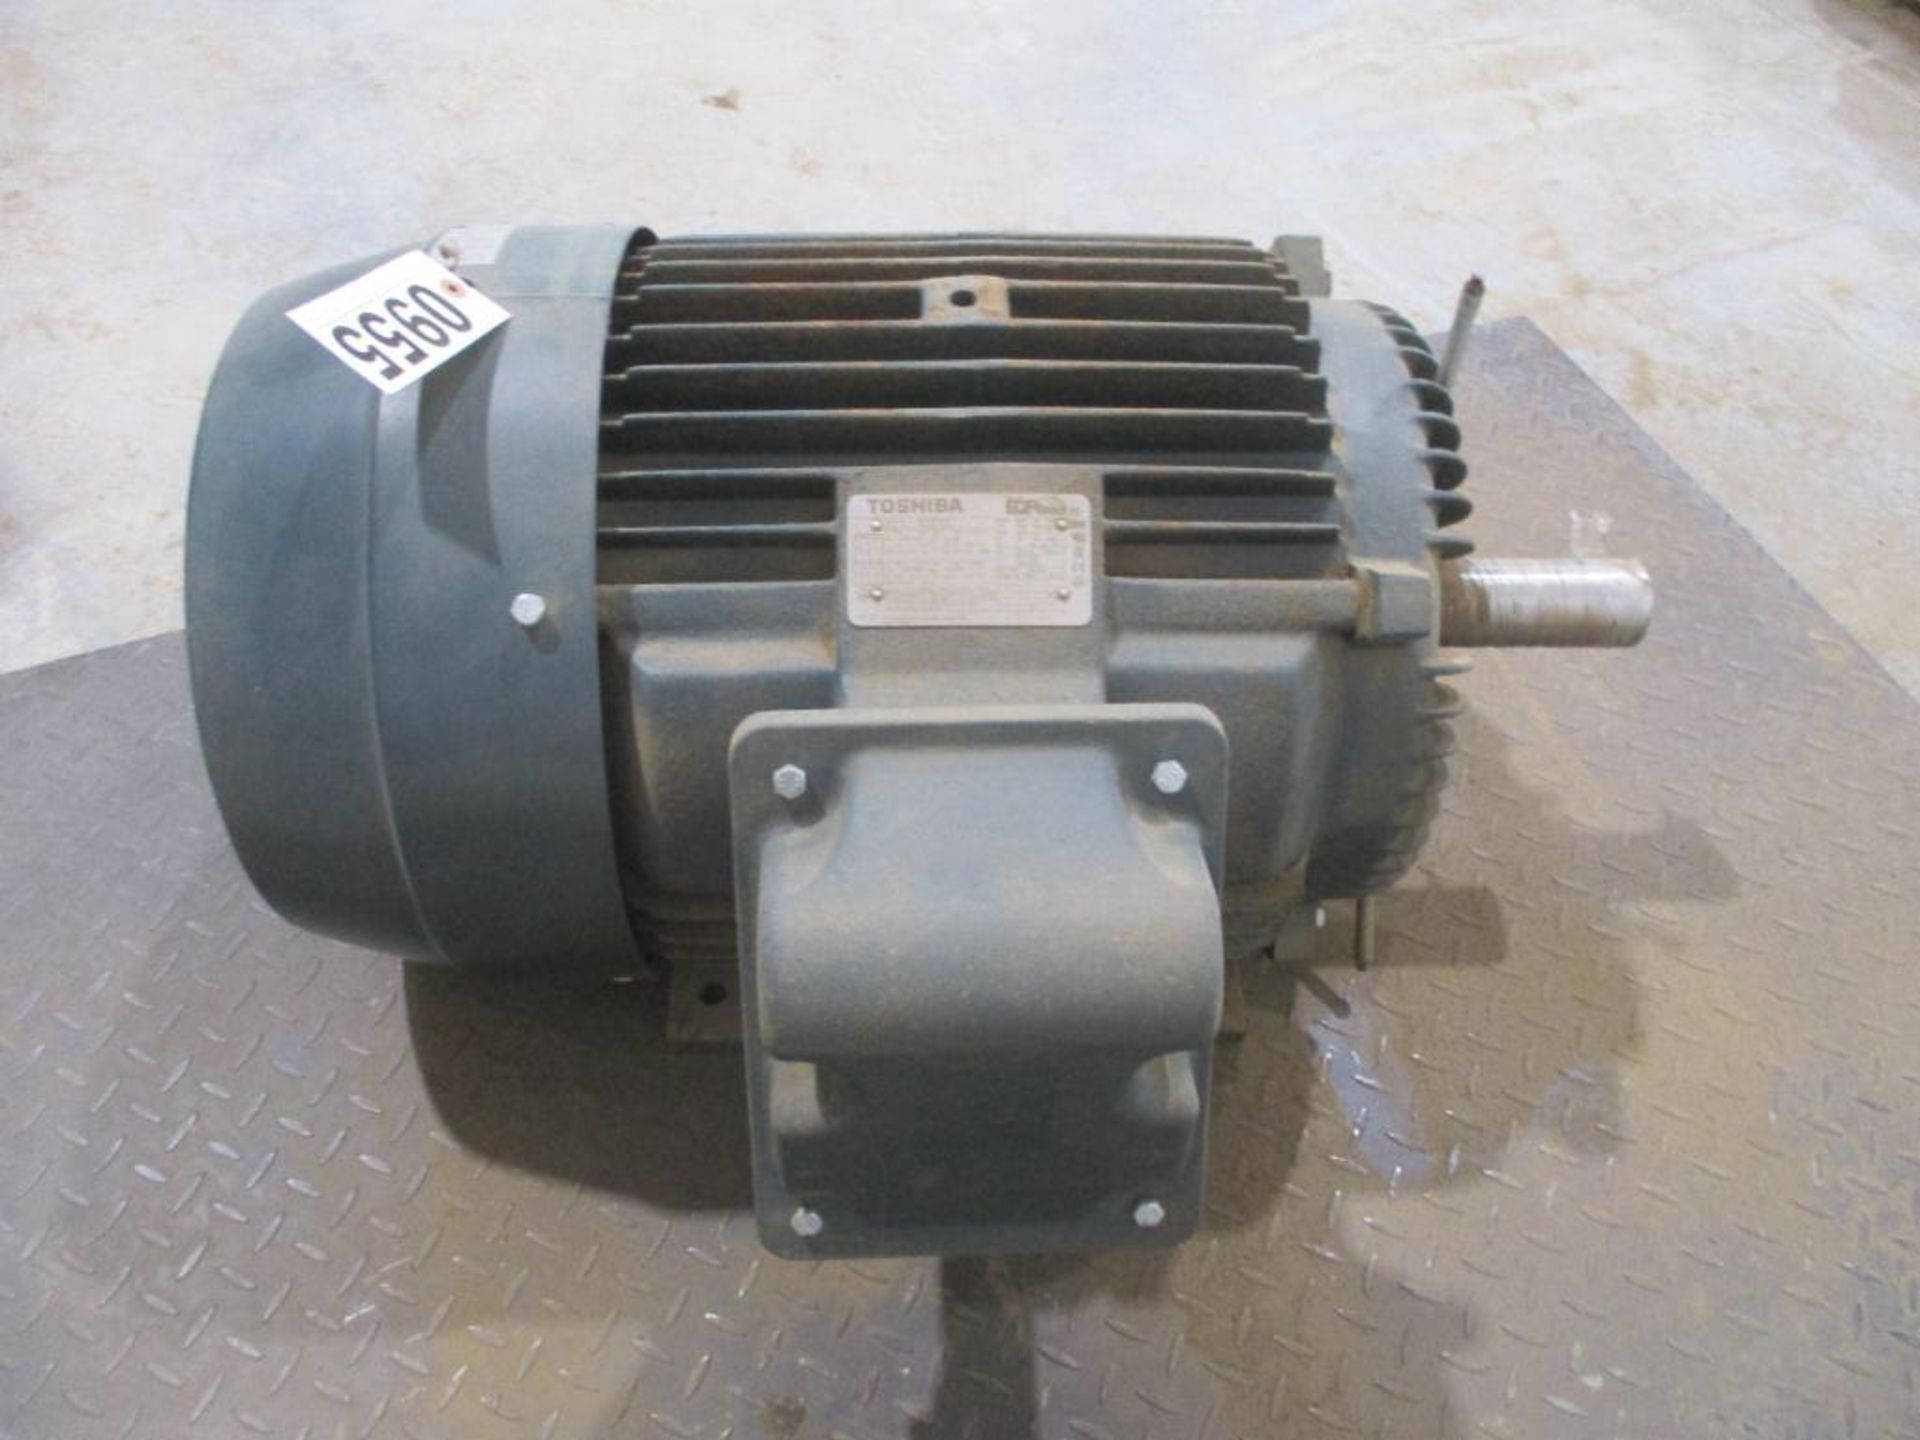 TOSHIBA 3 PHASE 40HP 1470-1775RPM 324T FRAME A/C MOTOR P/N 0404SDSR41A-P, 670# lbs (There will be a